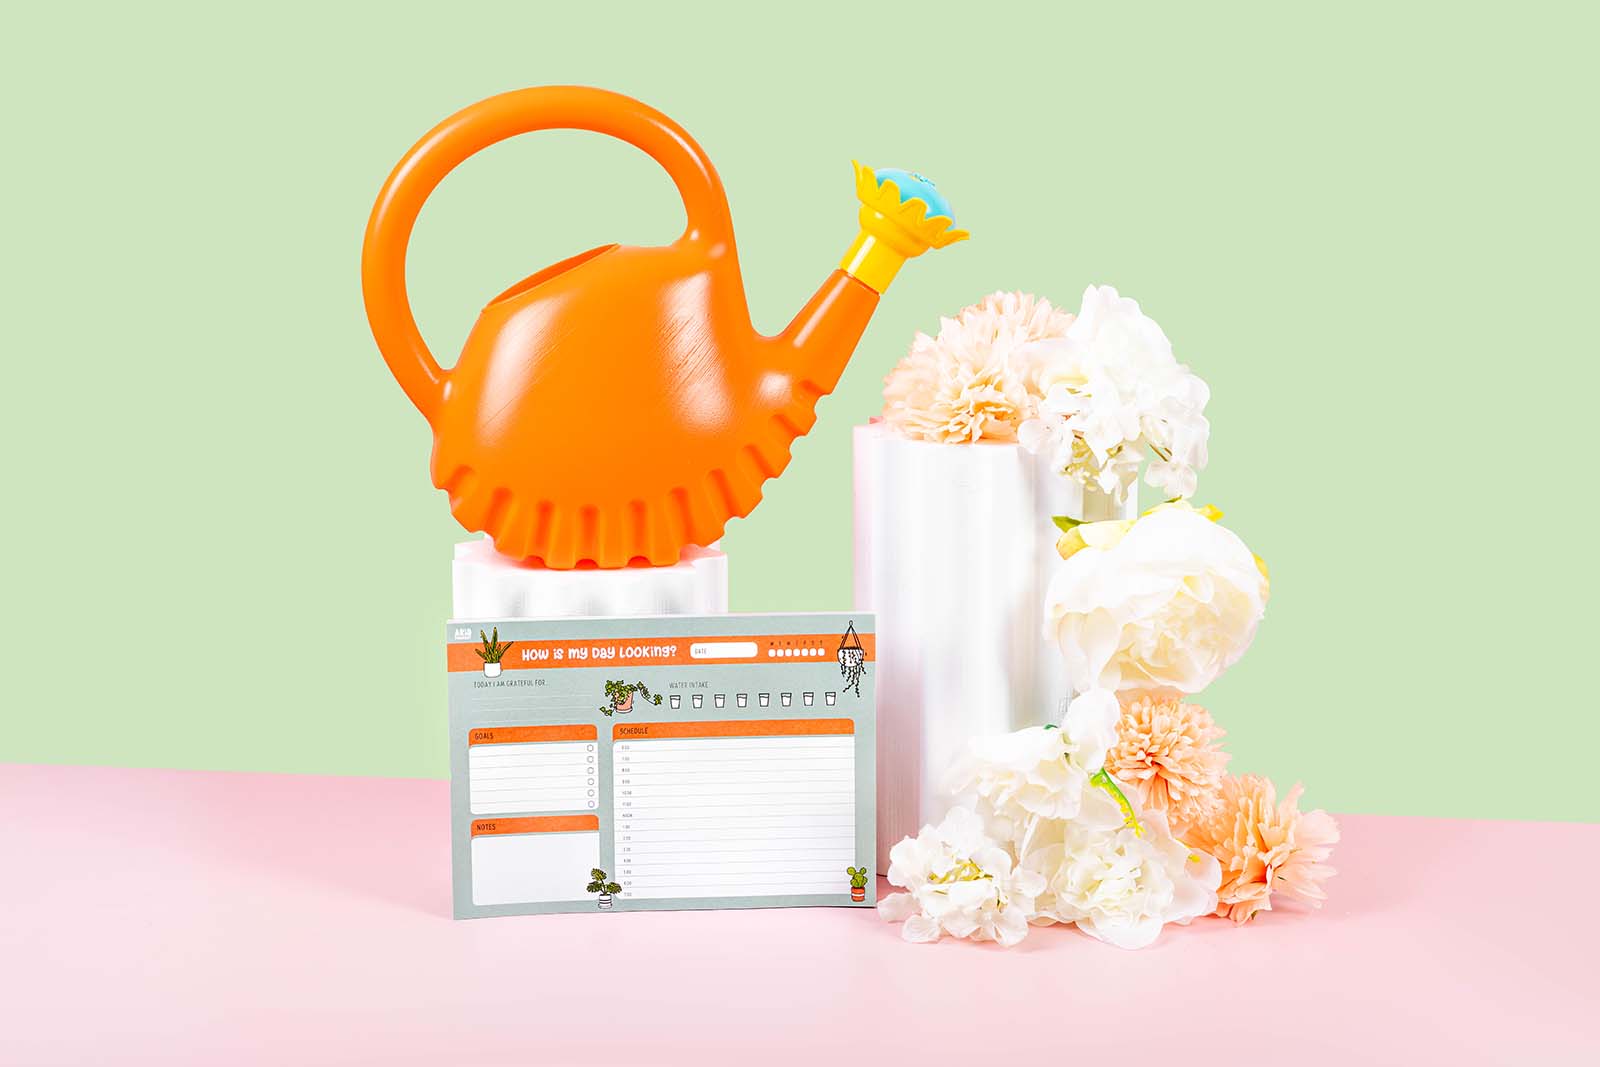 Fun Product Photography for a Stationary Brand. Styled Product Stills by Megzie Makes